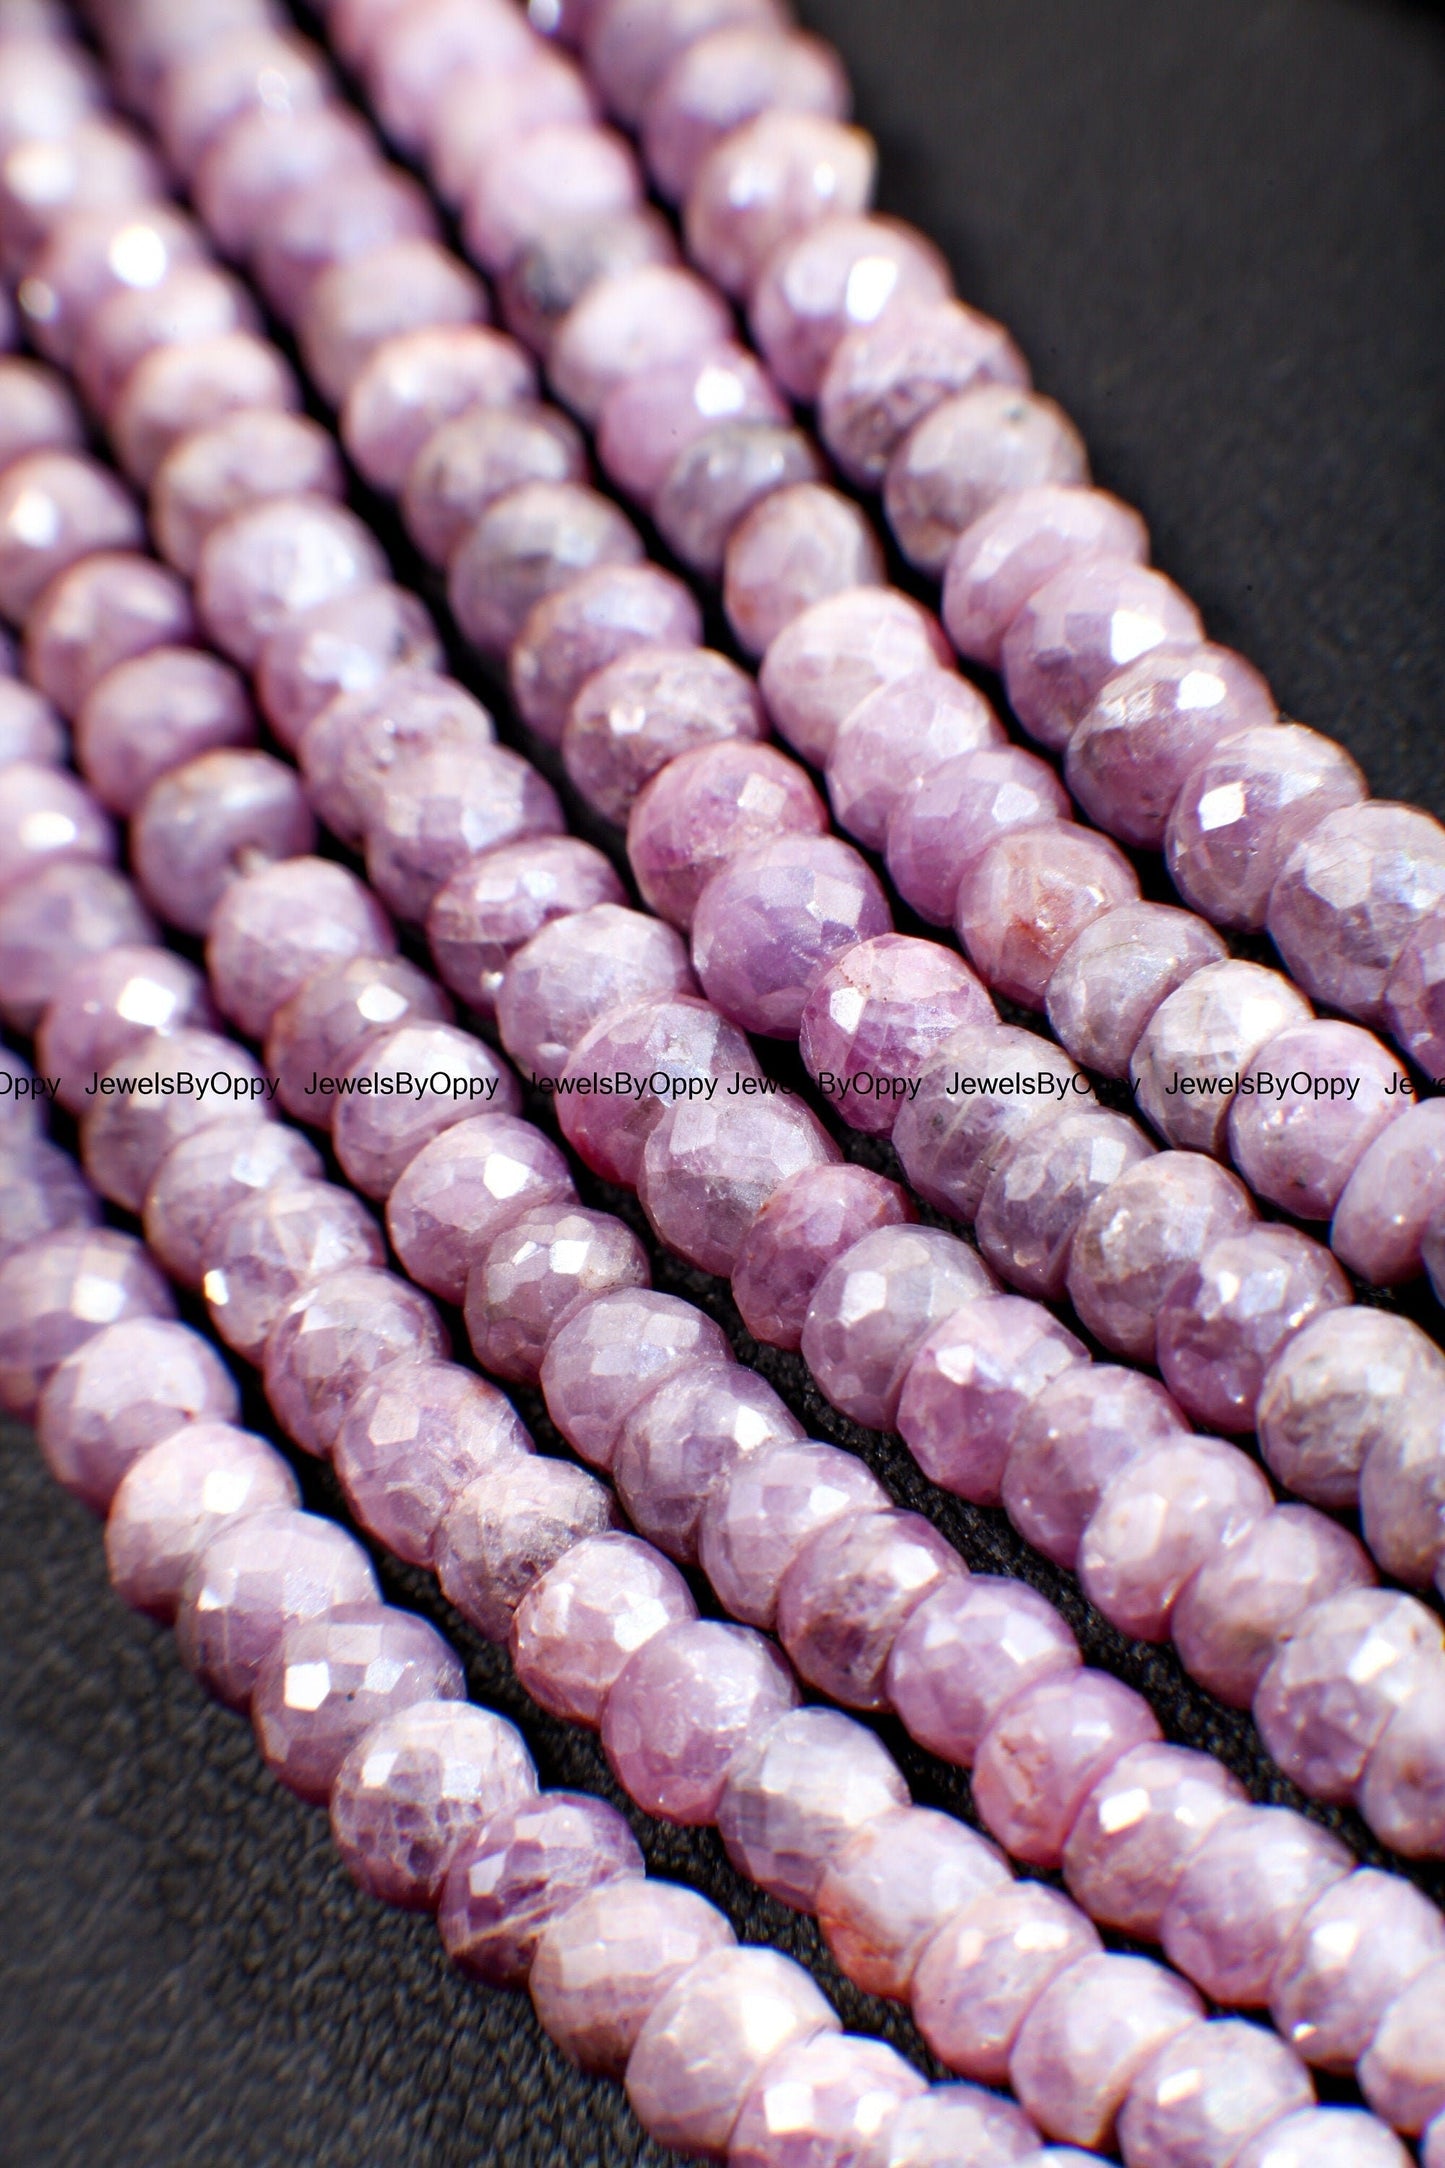 Pink Silverite Sapphire Rondelle, Rare Natural Pink Sapphire Faceted Roundel 2.5-6.5mm, Jewelry Making Gemstone Beads 3&quot;,6&quot;,13&quot; Strand